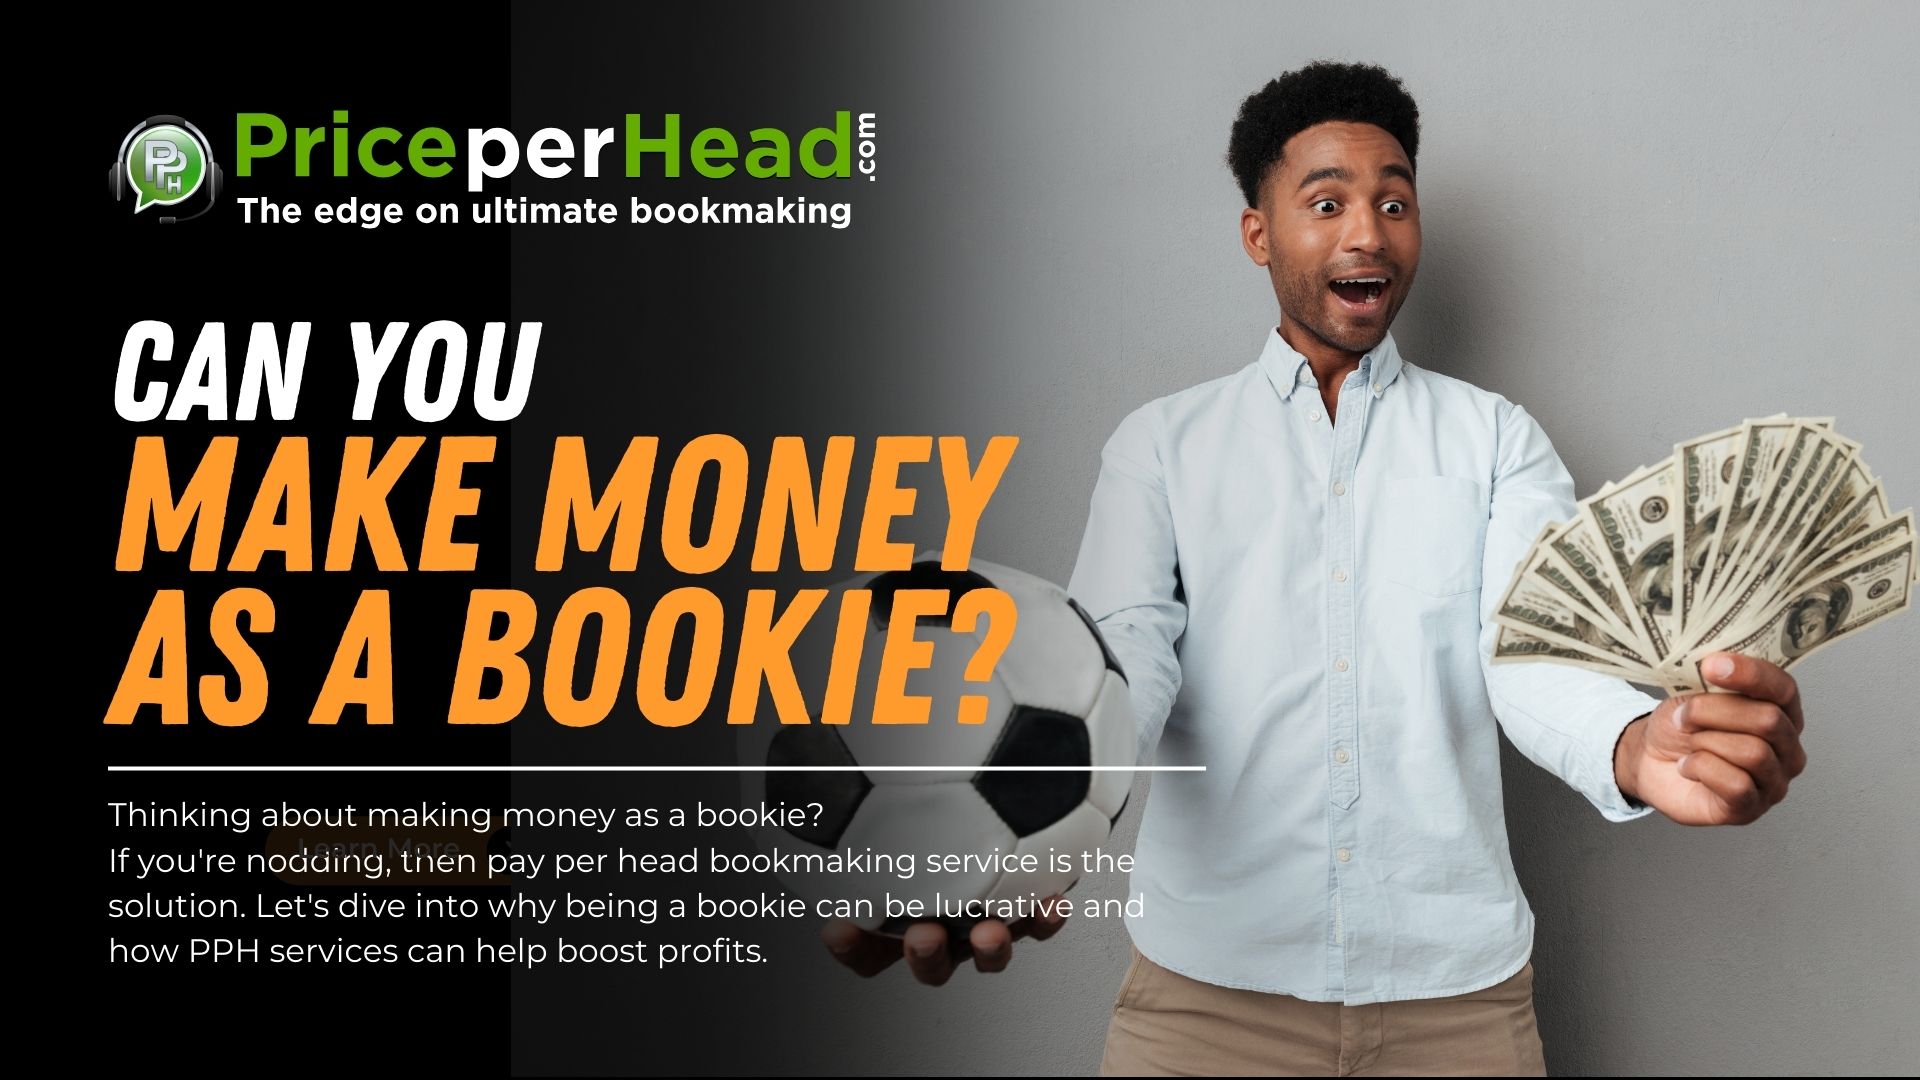 can you make money as a bookie, pay per head, price per head